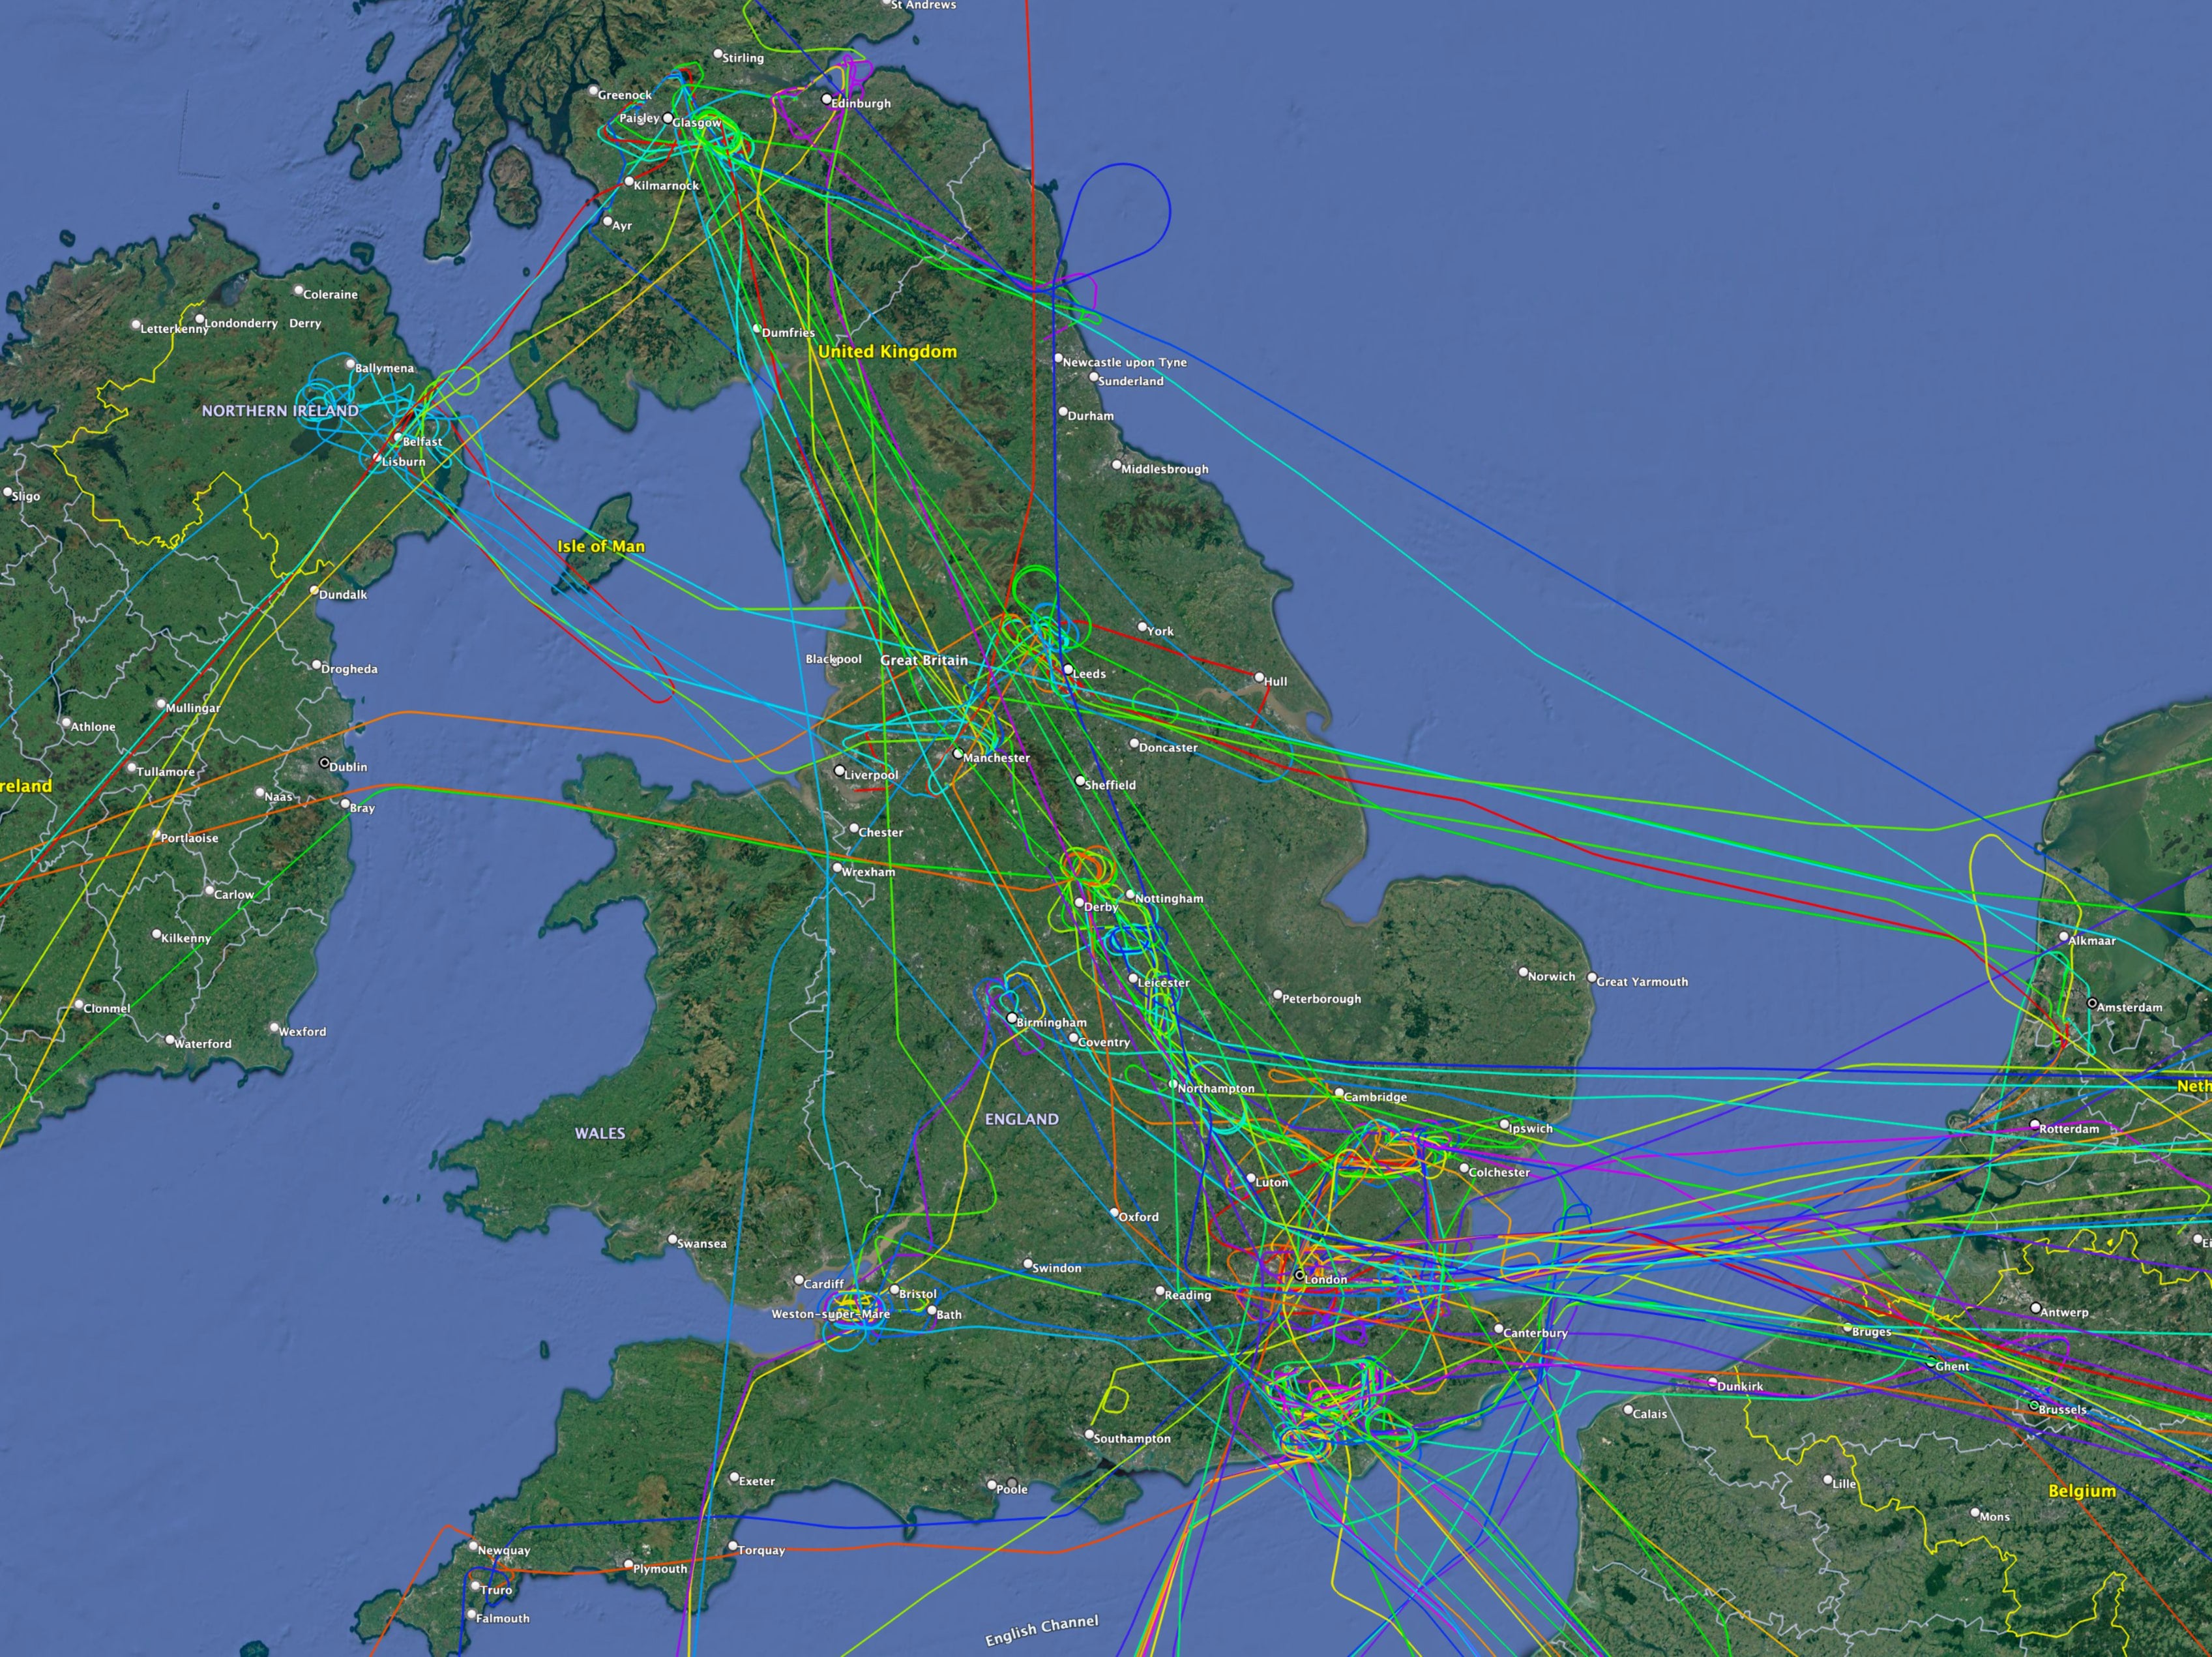 Knitting pattern? Paths of all the flights that were diverted on Sunday evening